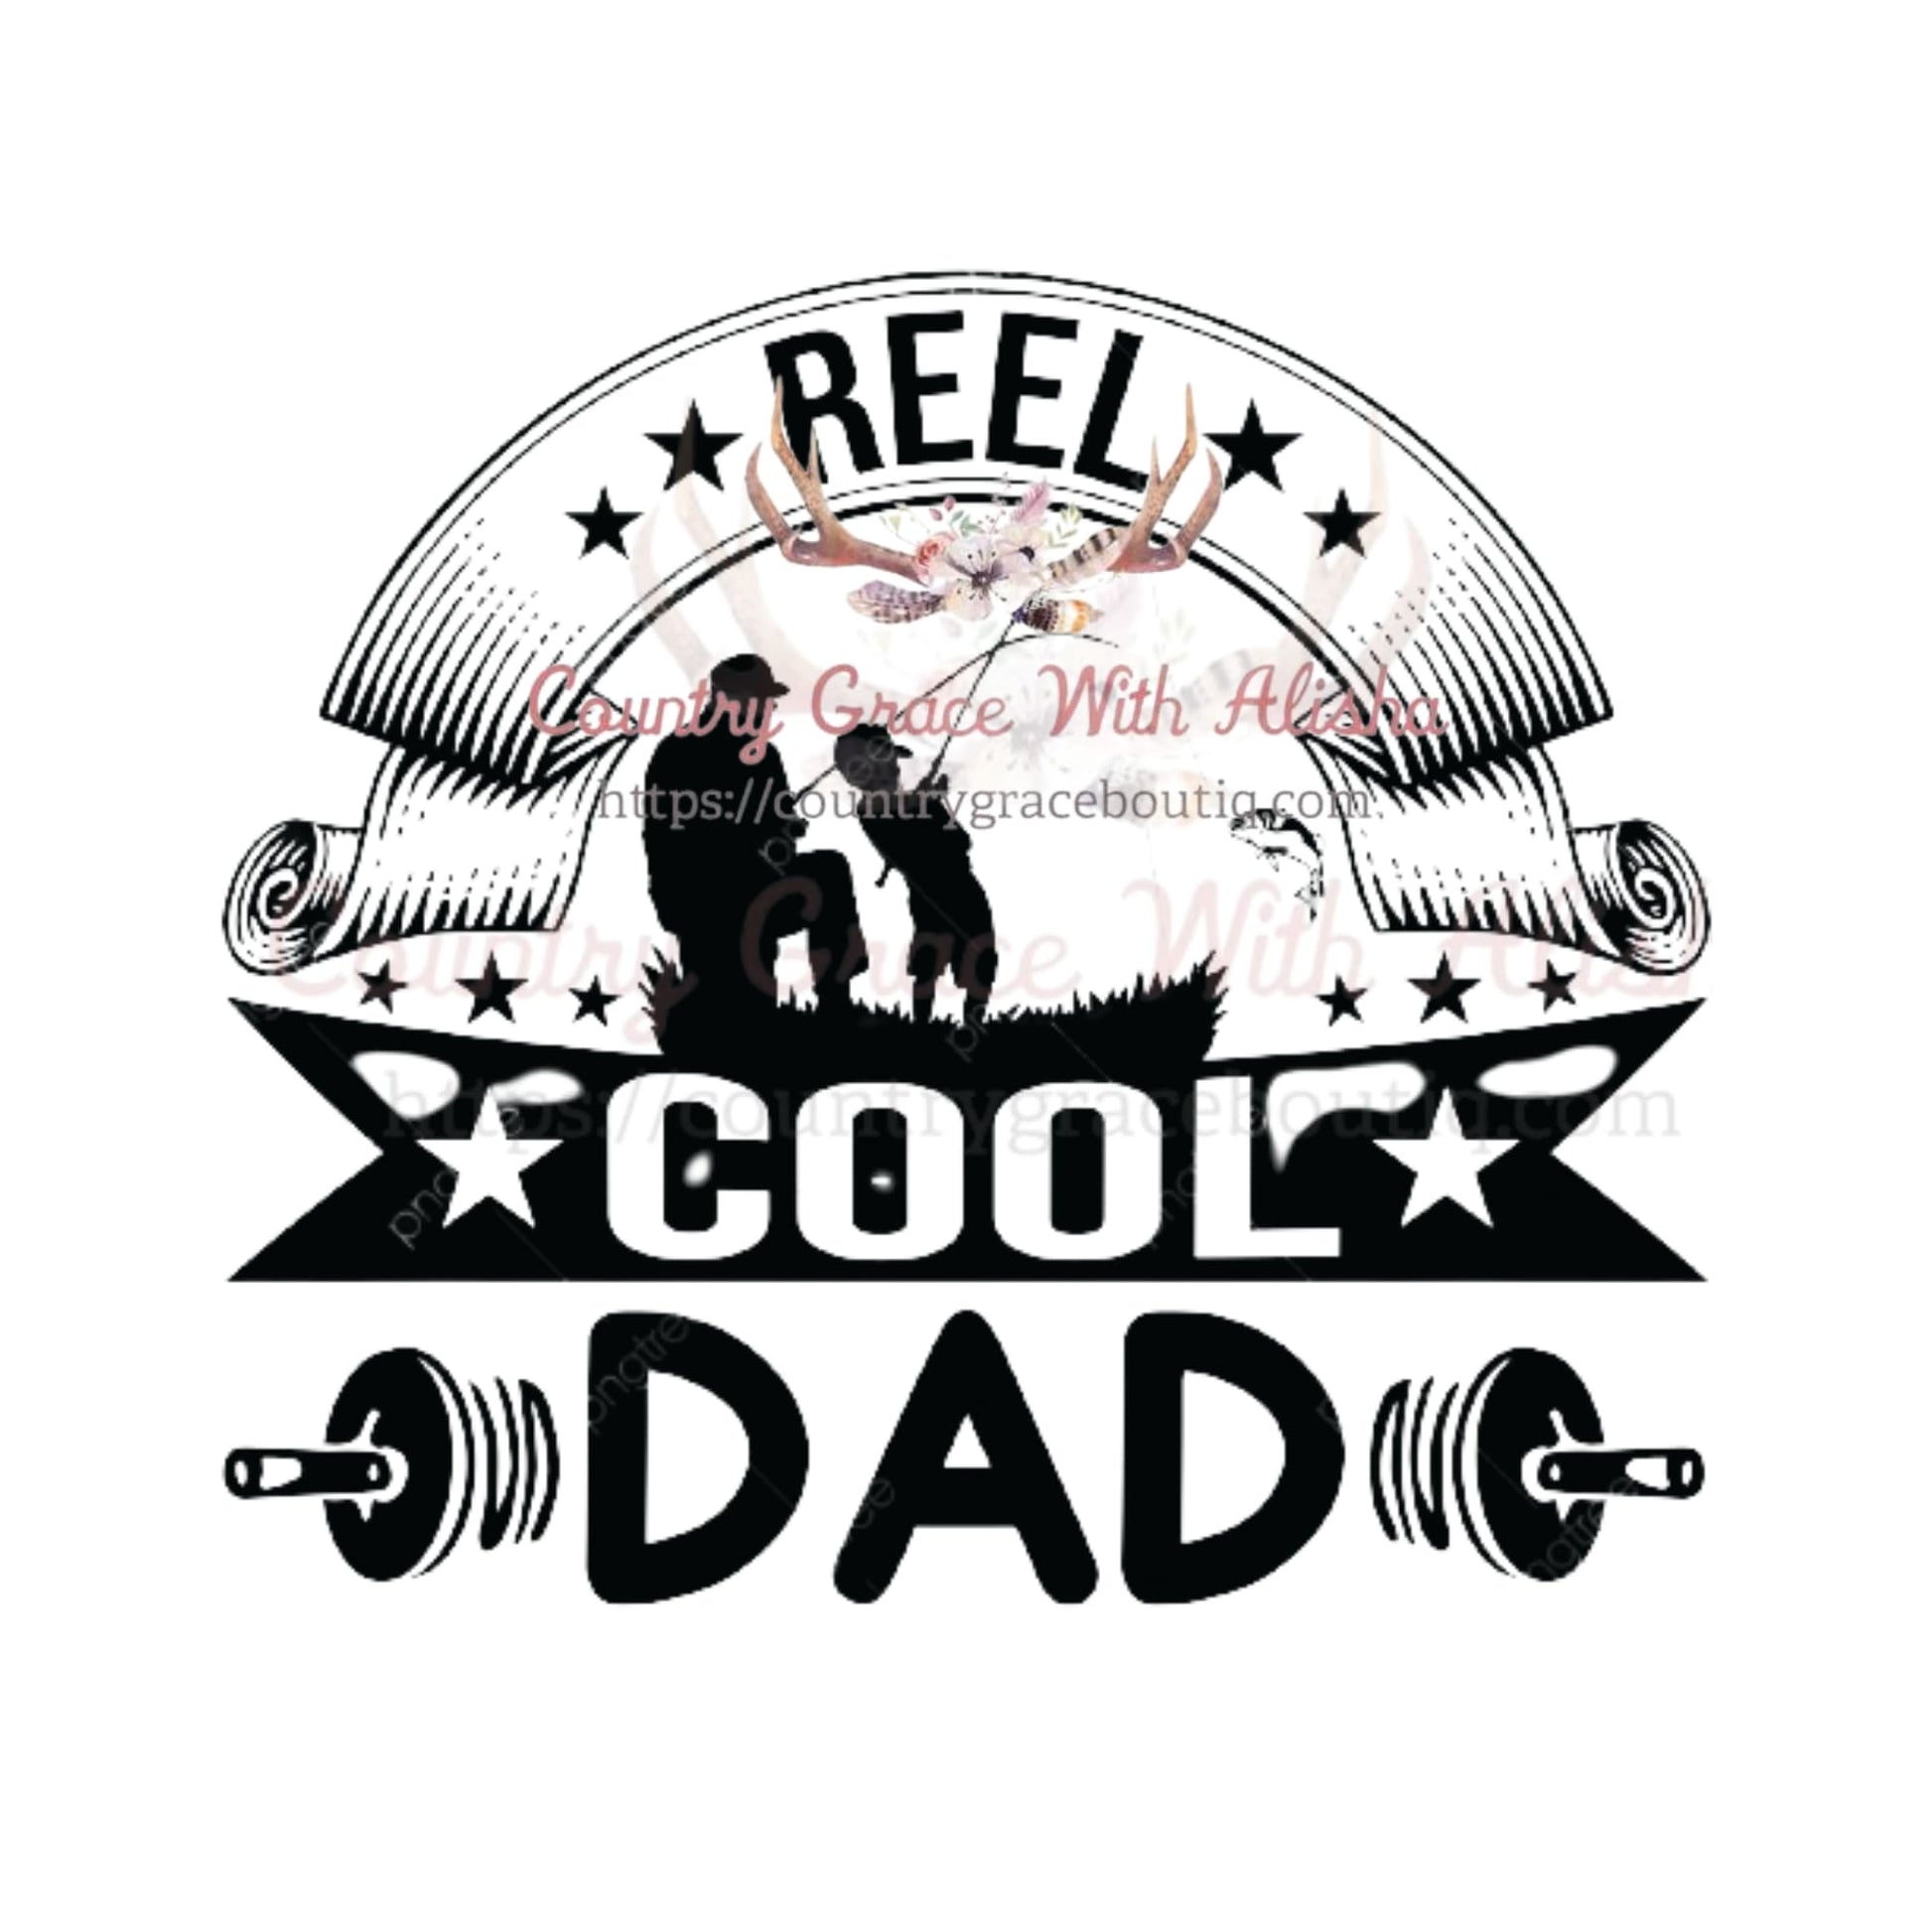 Reel Cool Dad Sublimation Transfer - Sub $1.50 Country Grace